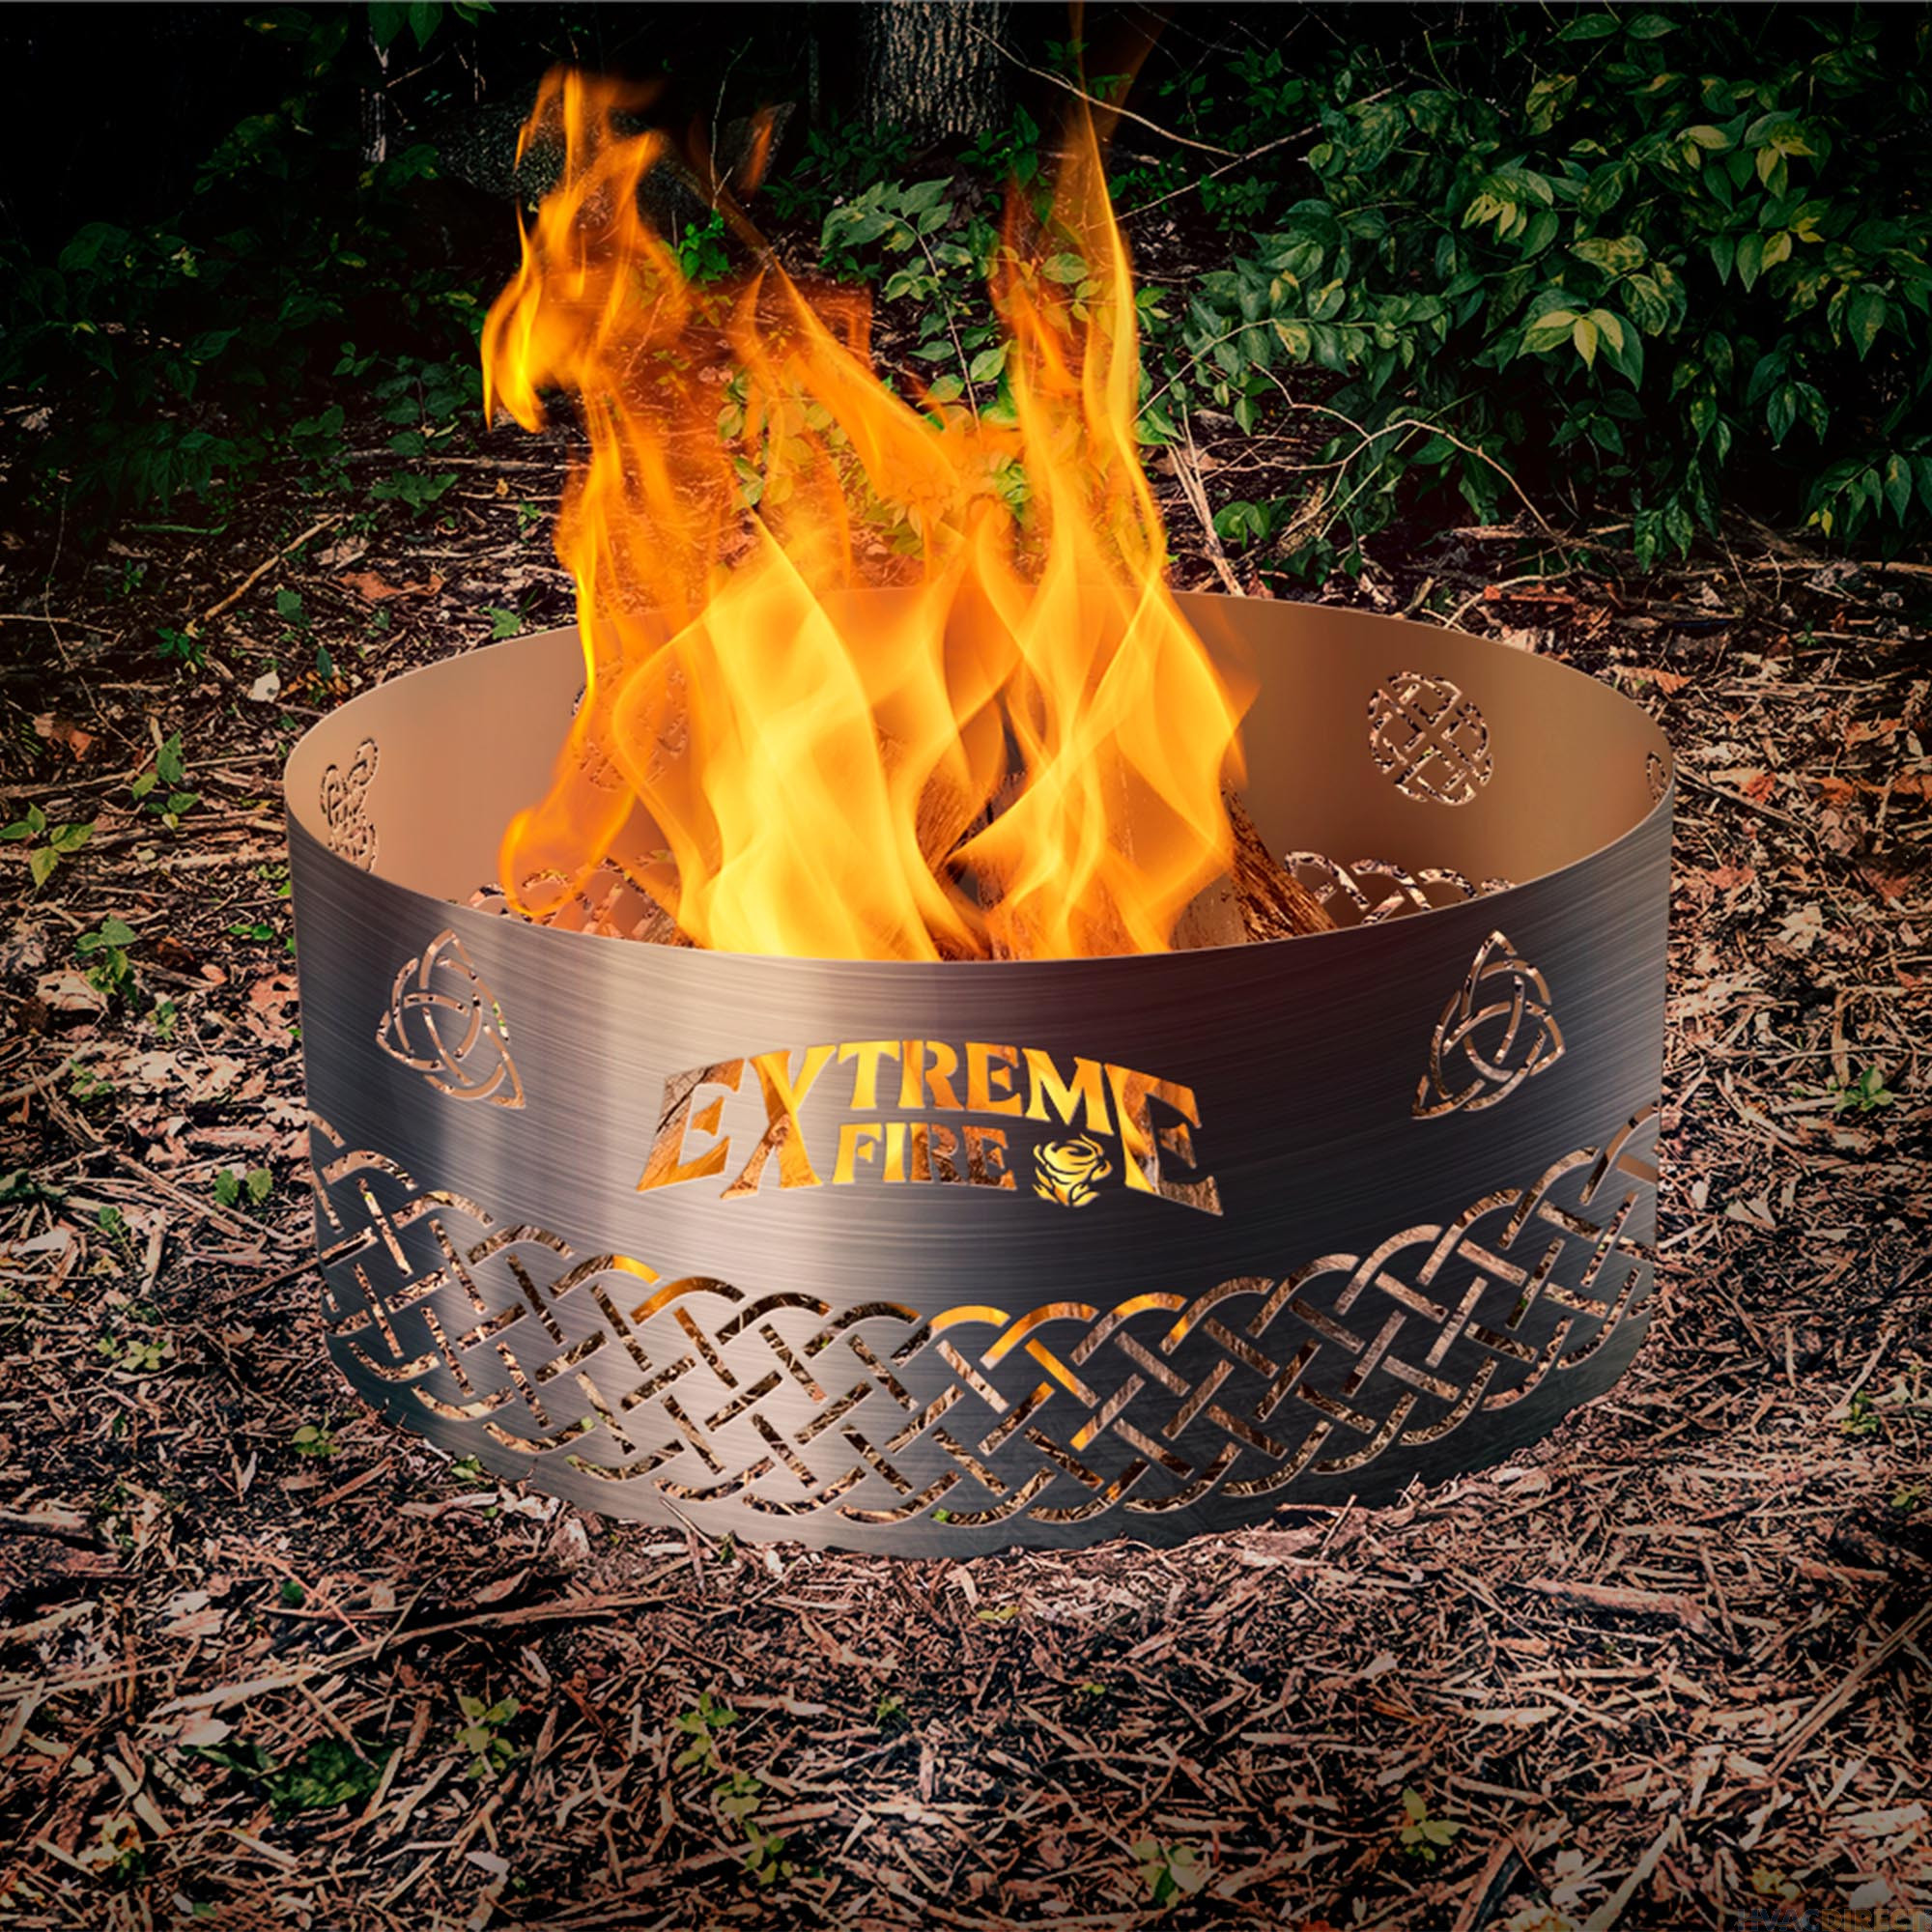 Extreme Fire “Celtic Symbols” Steel Fire Ring - 50005